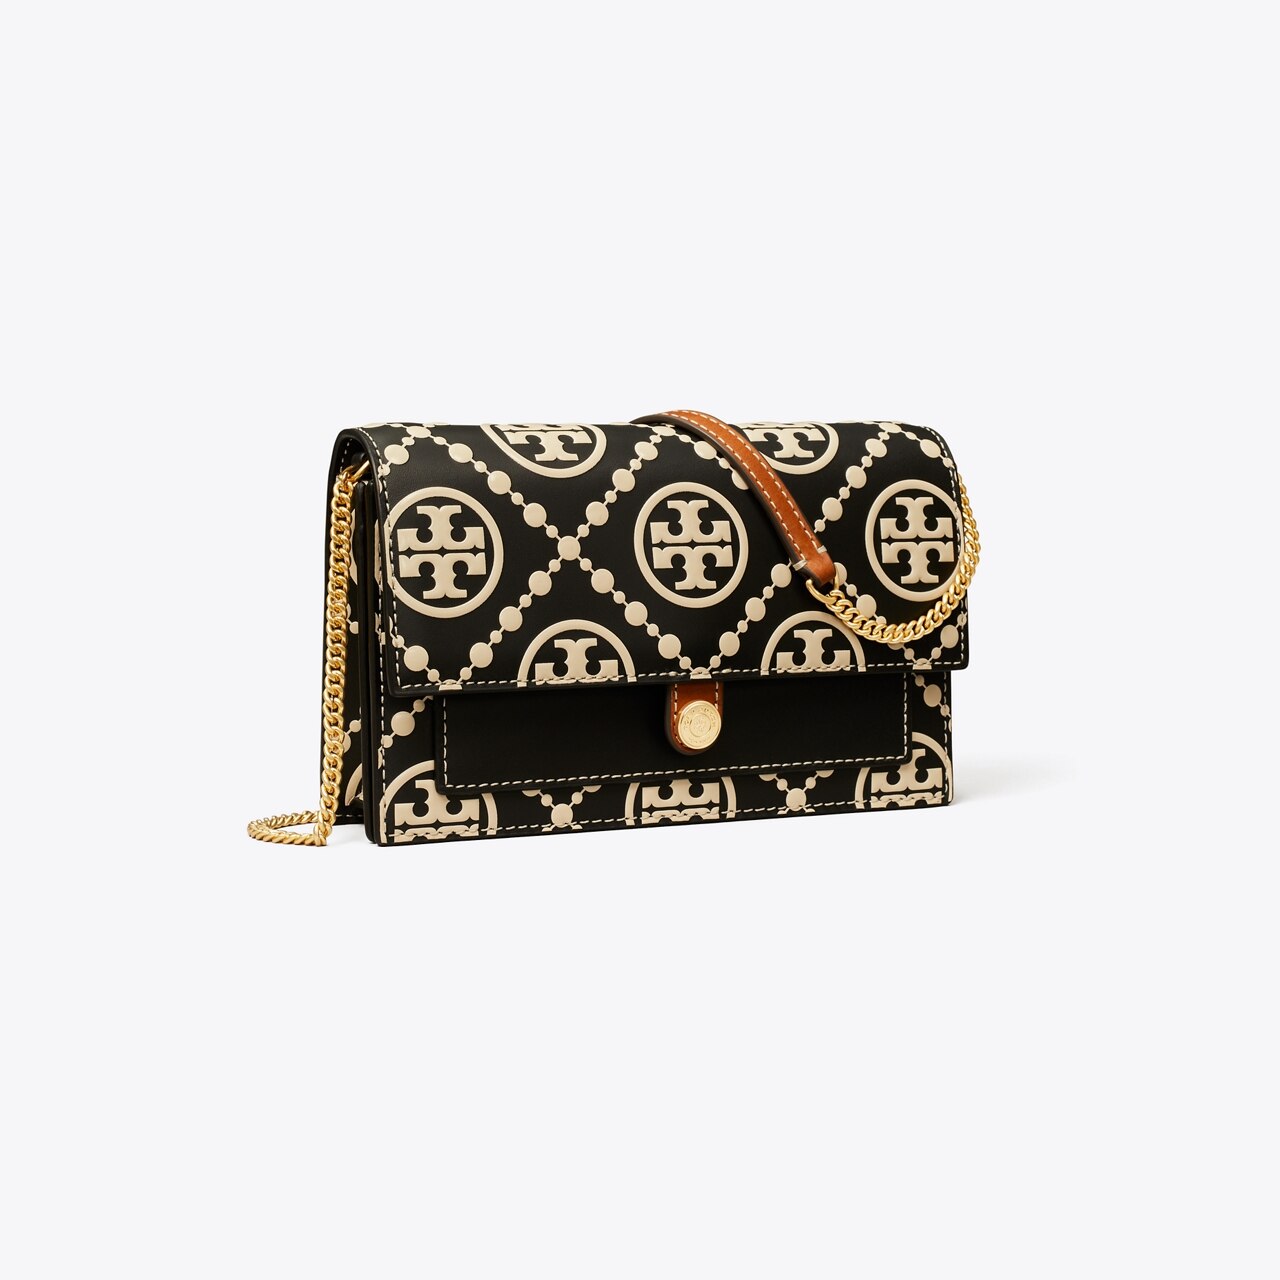 Tory Burch Women's T Monogram Perforated Mini Barrel Bag in Almond Flour, One Size